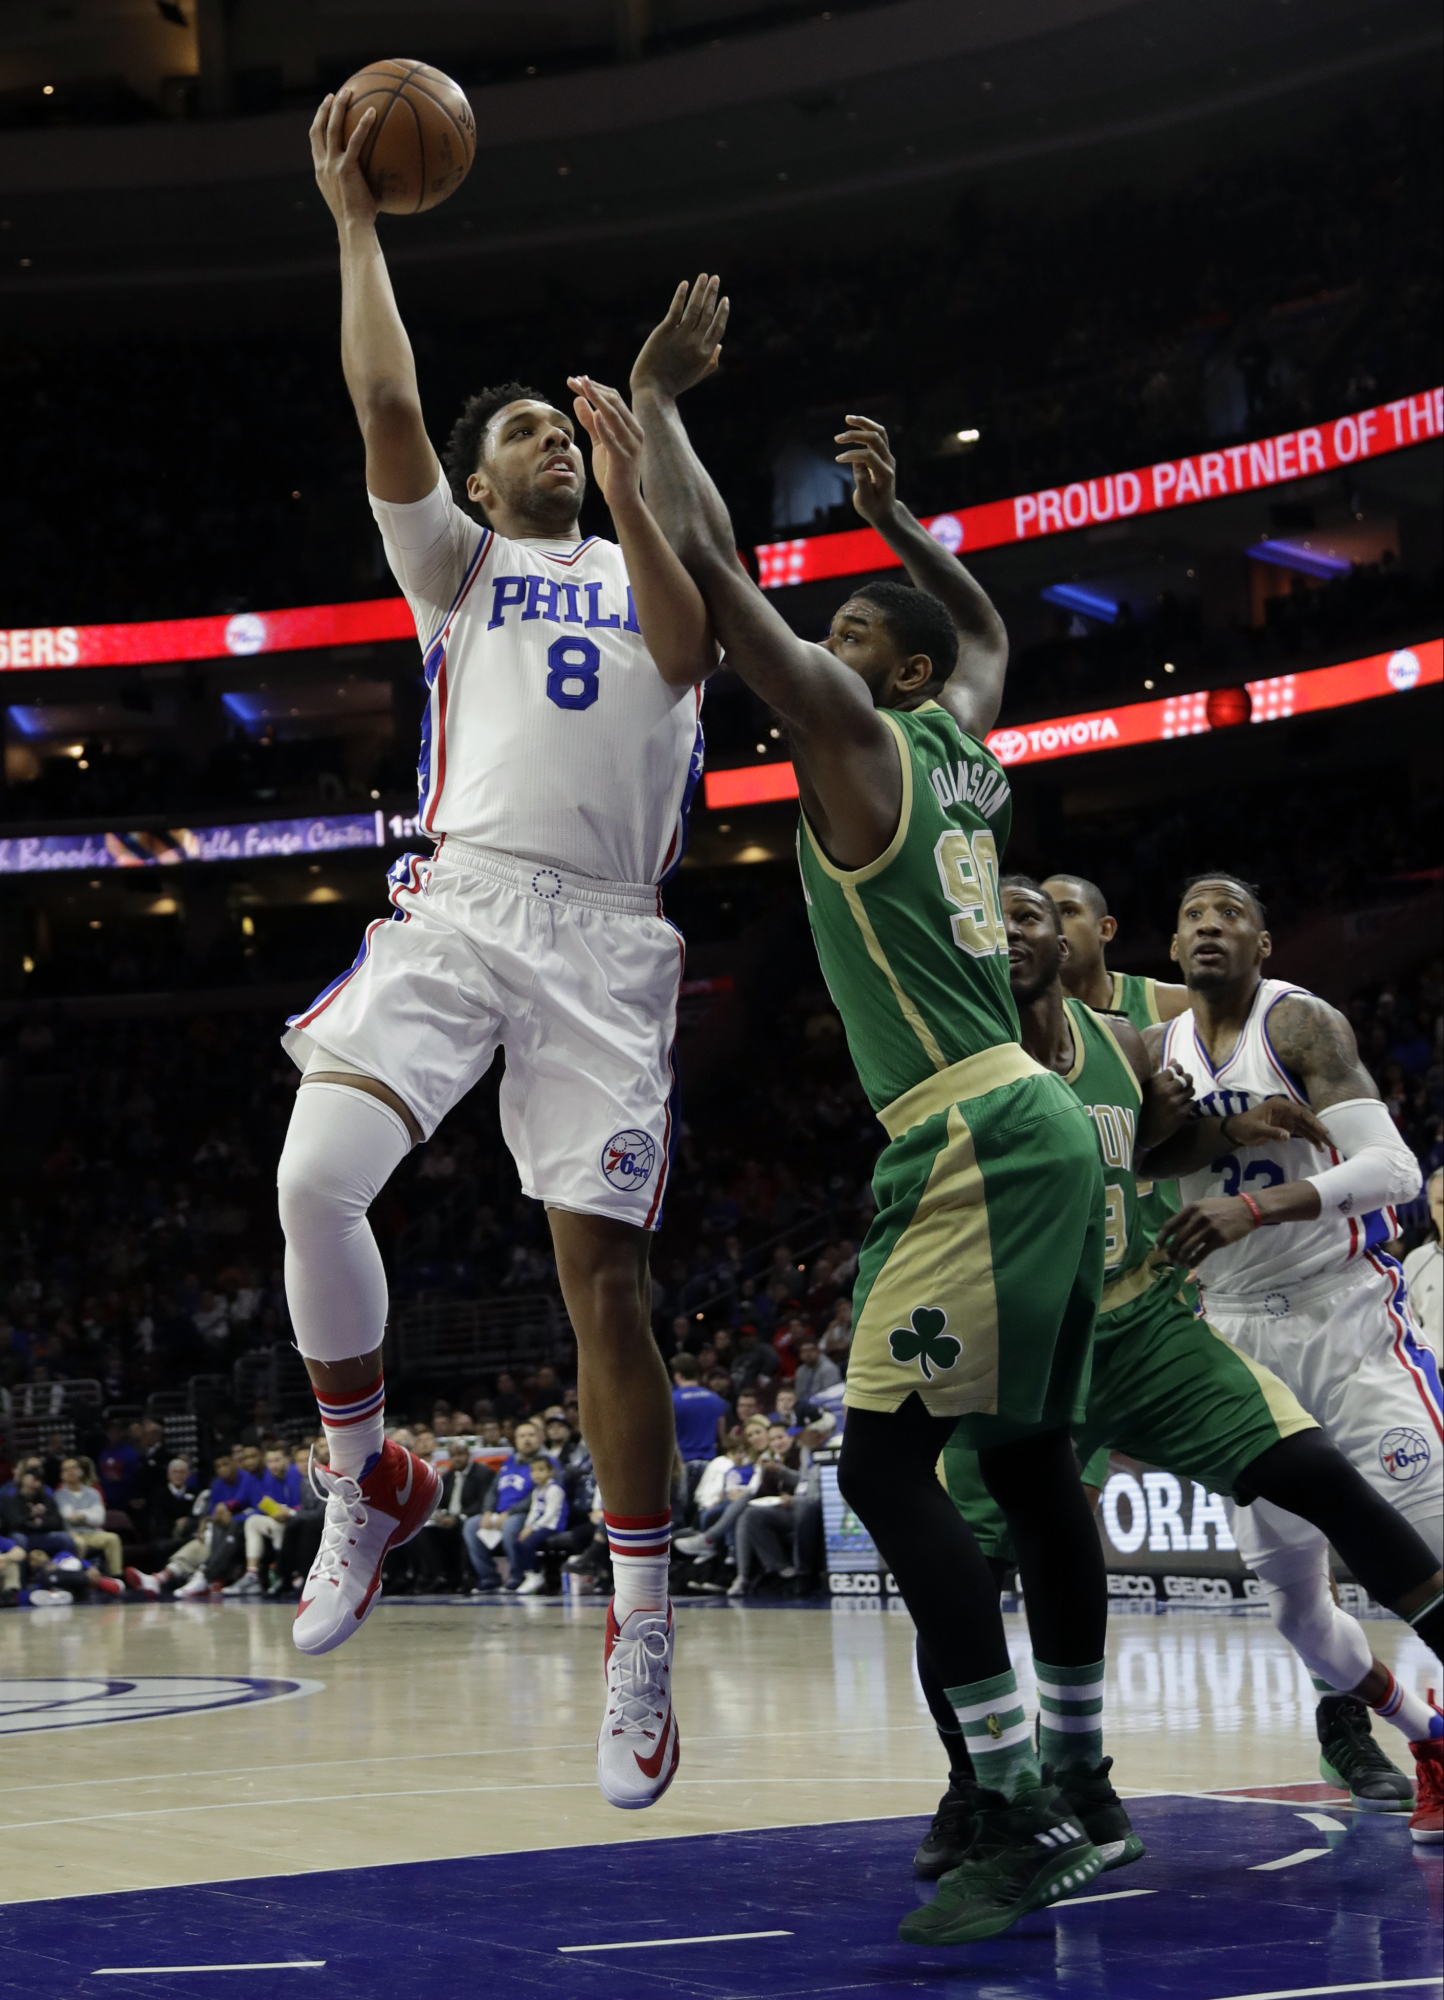 Sixers star Joel Embiid hopes improbable path to MVP award inspires others  - The Japan Times